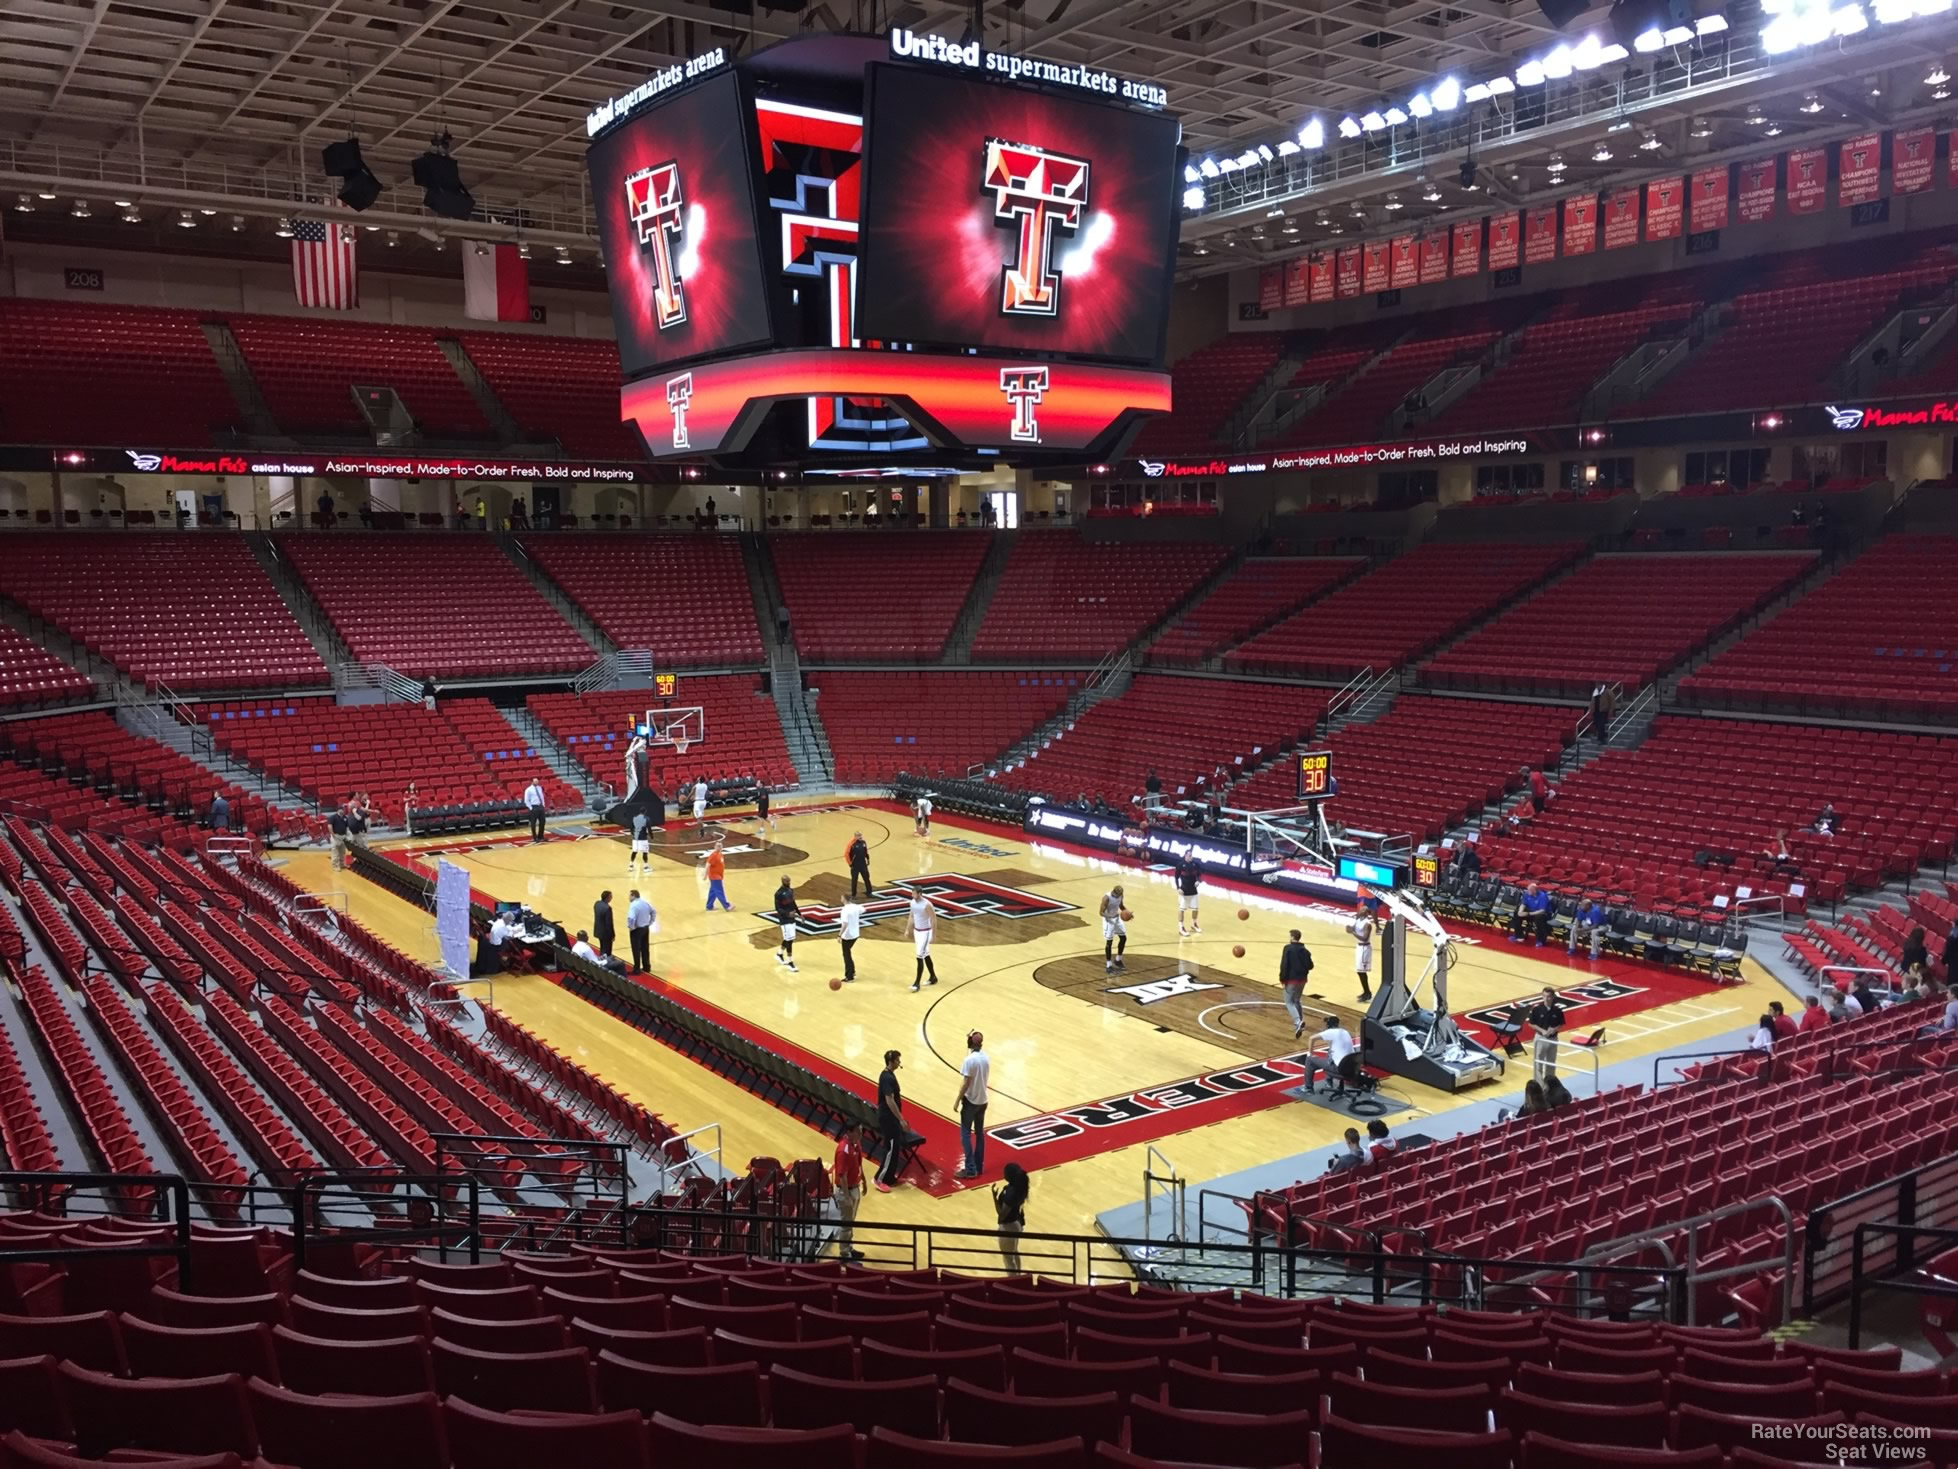 section 121, row 25 seat view  - united supermarkets arena